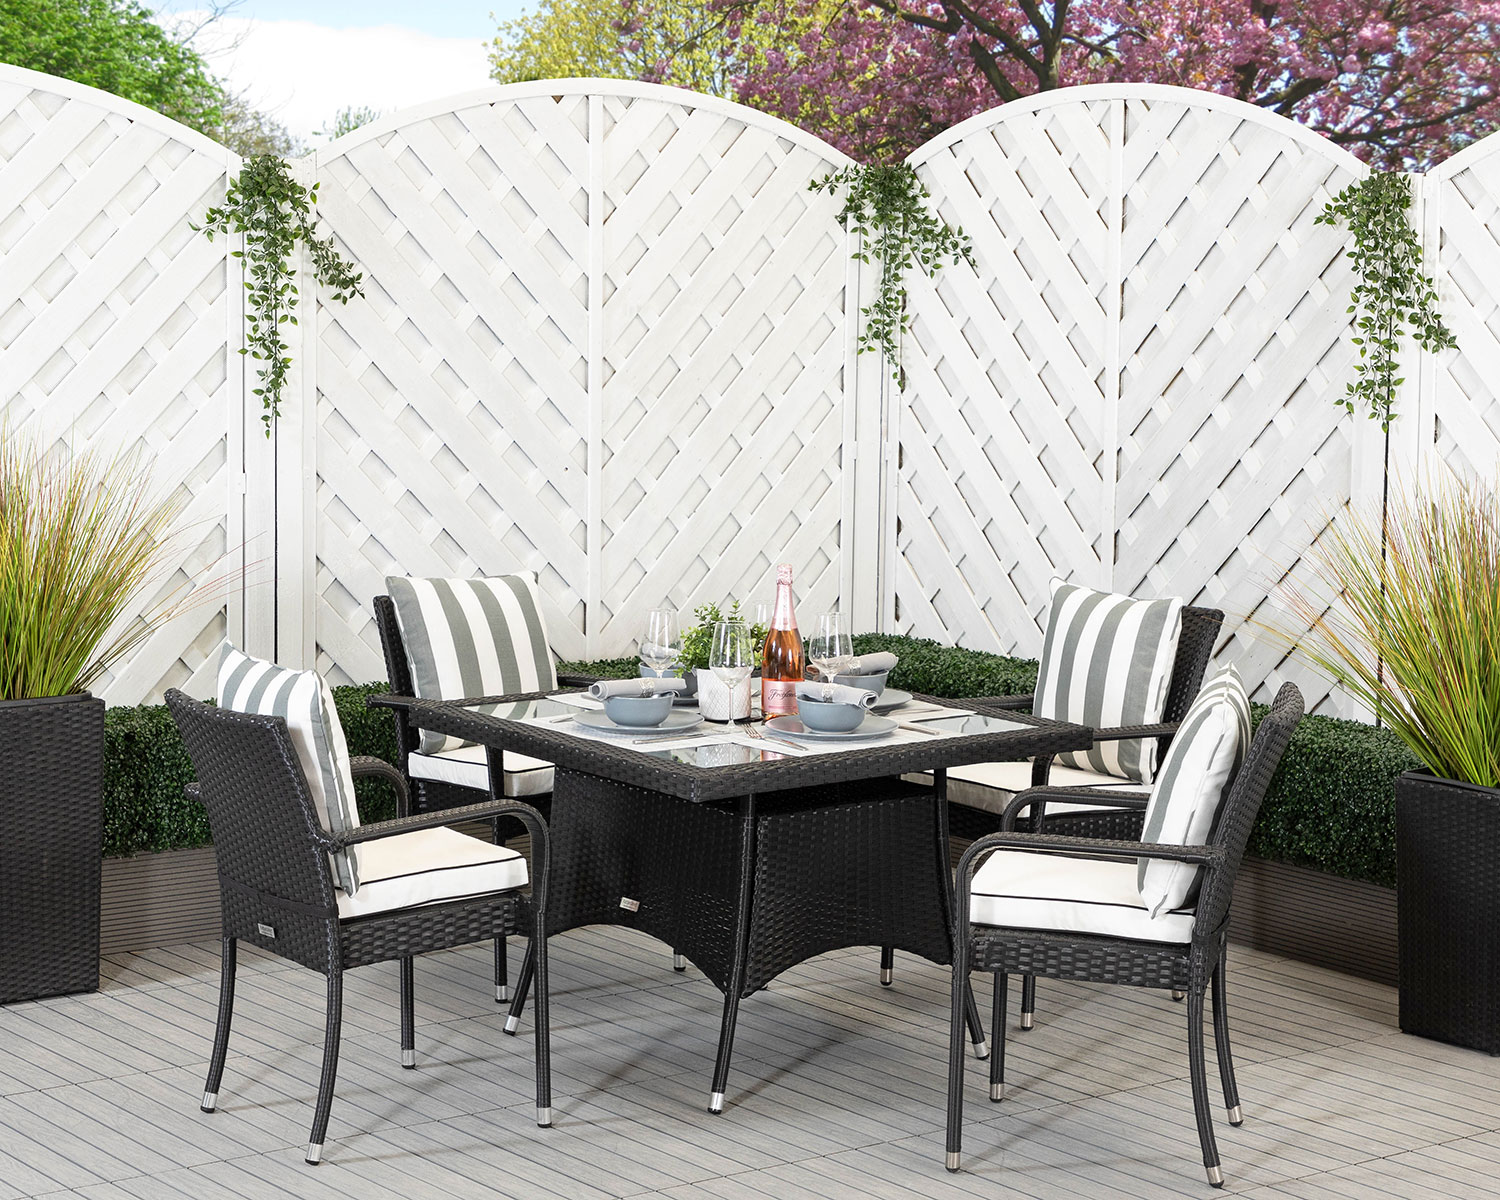 4 Seat Rattan Garden Dining Set With Square Dining Table in Black